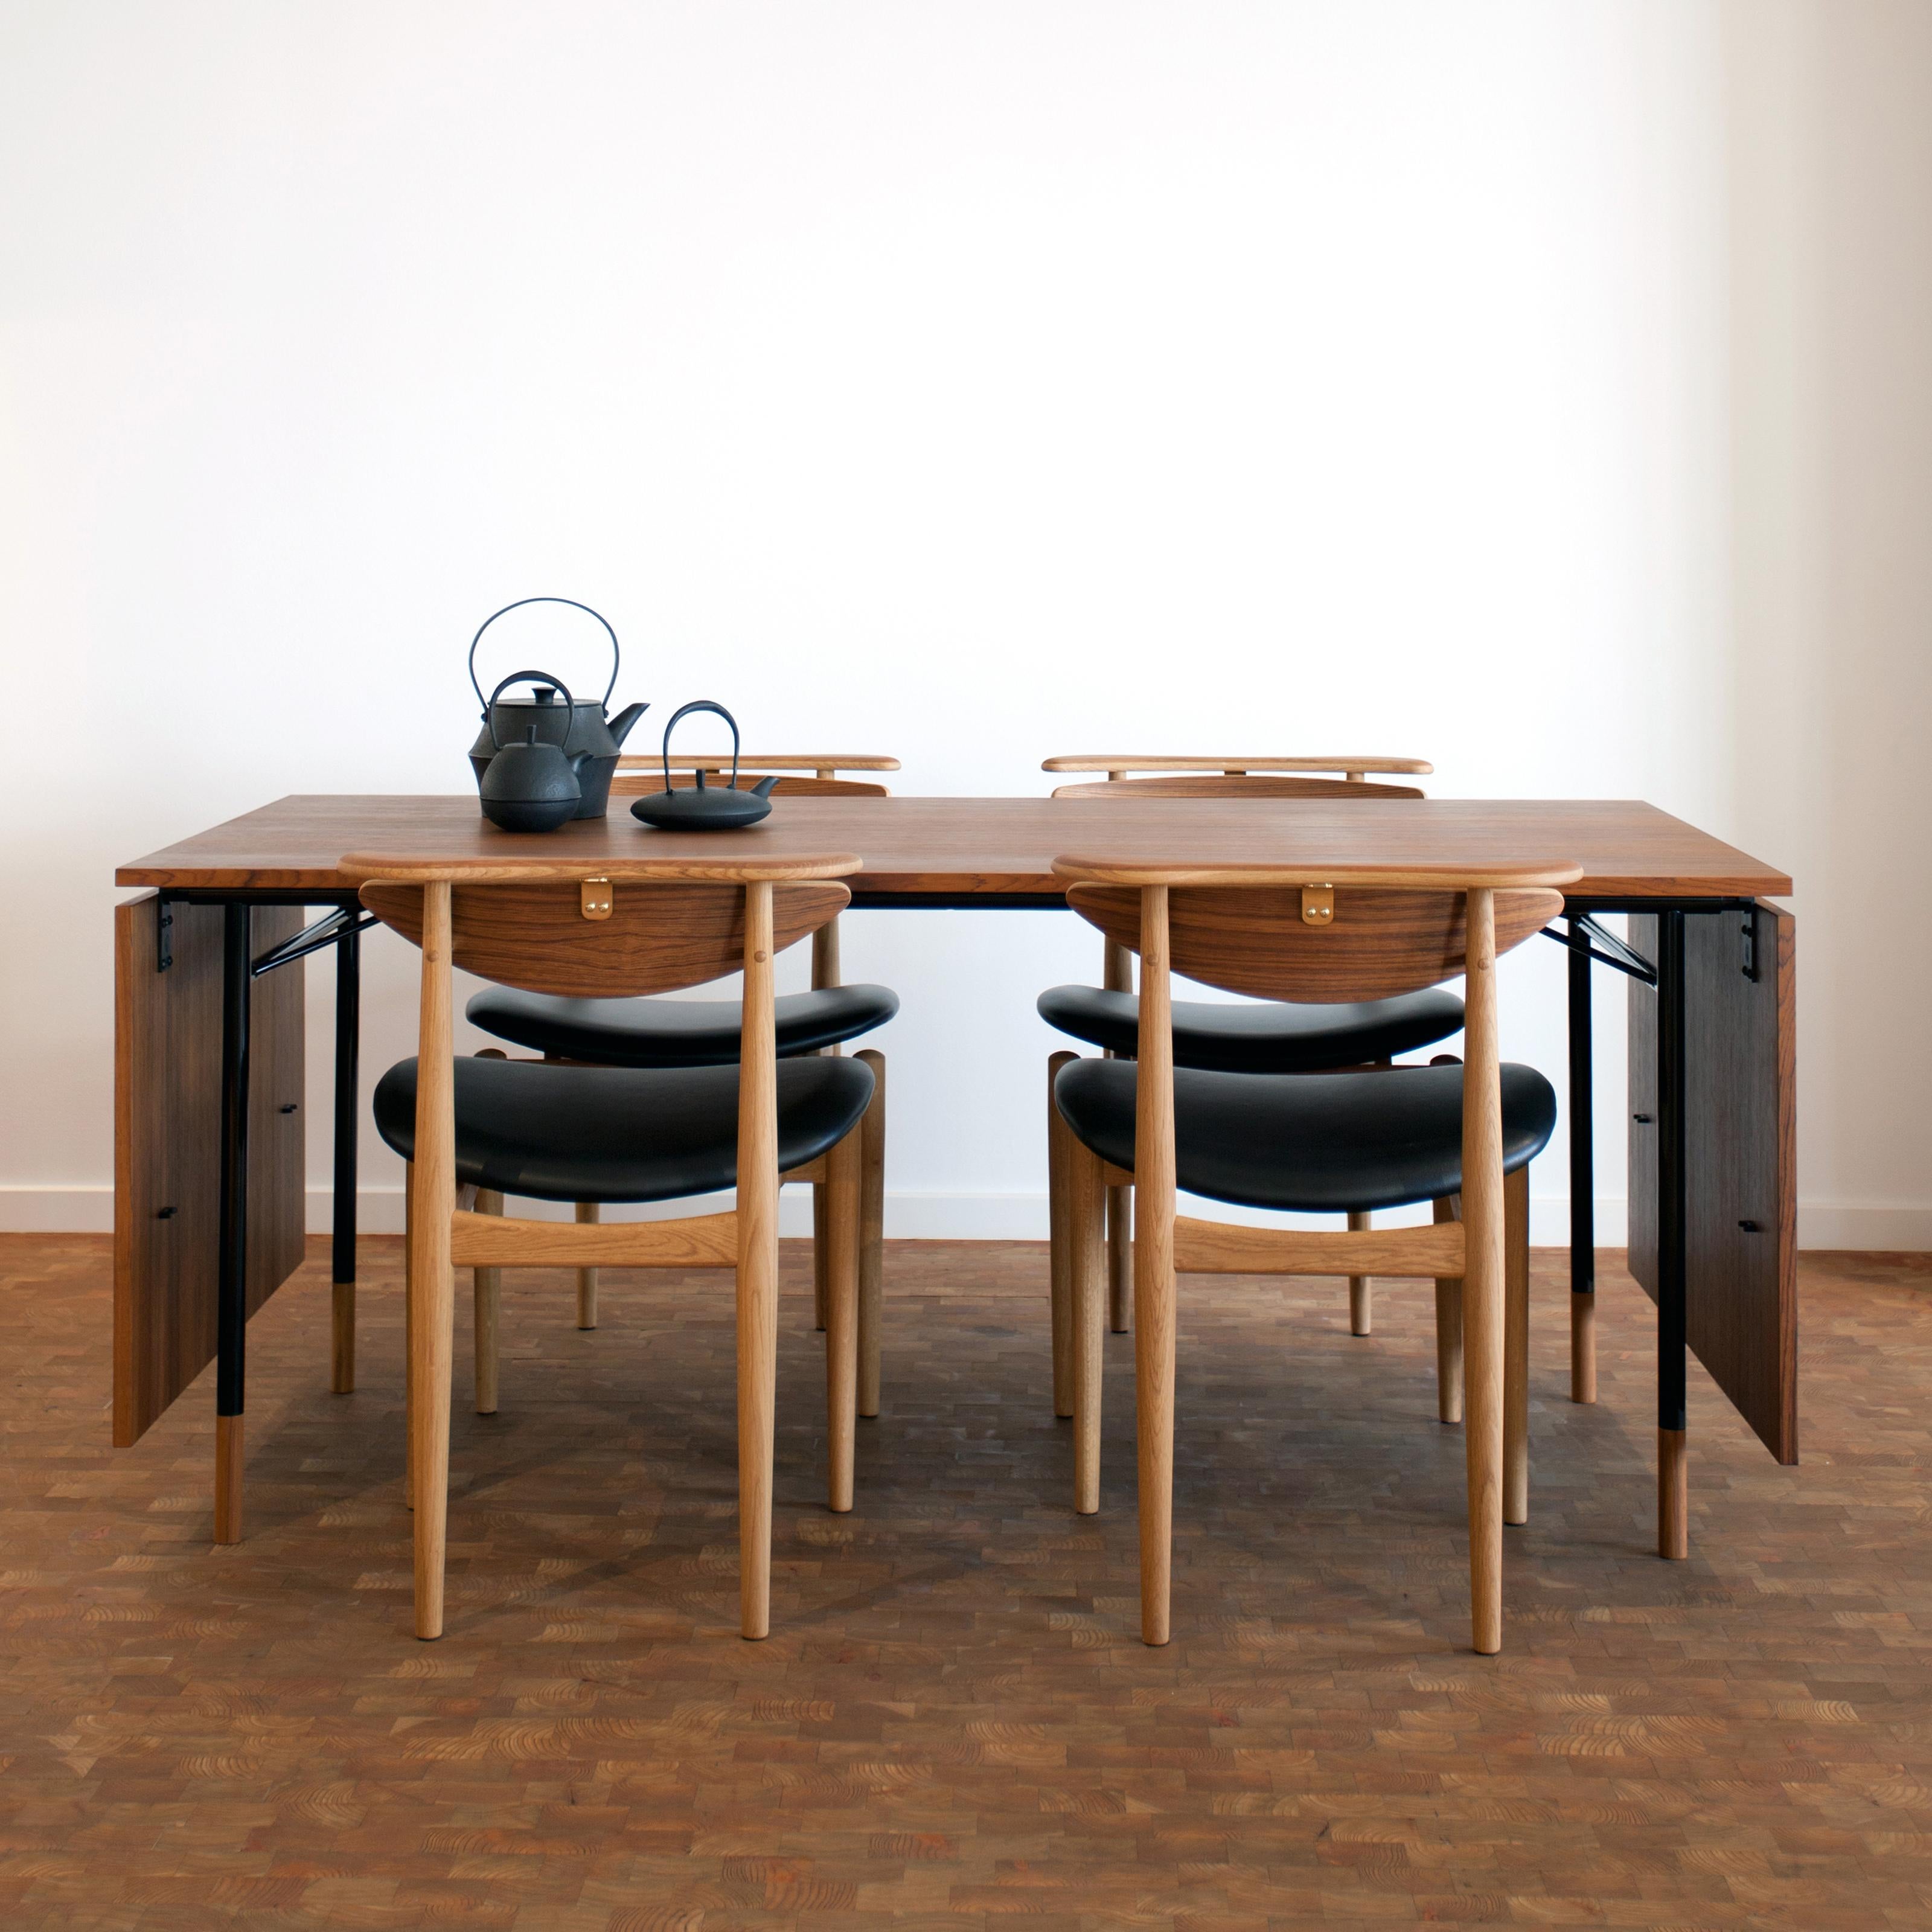 Finn Juhl Nyhavn Dining Table with Two Drop Leaves, Lino and Wood 5